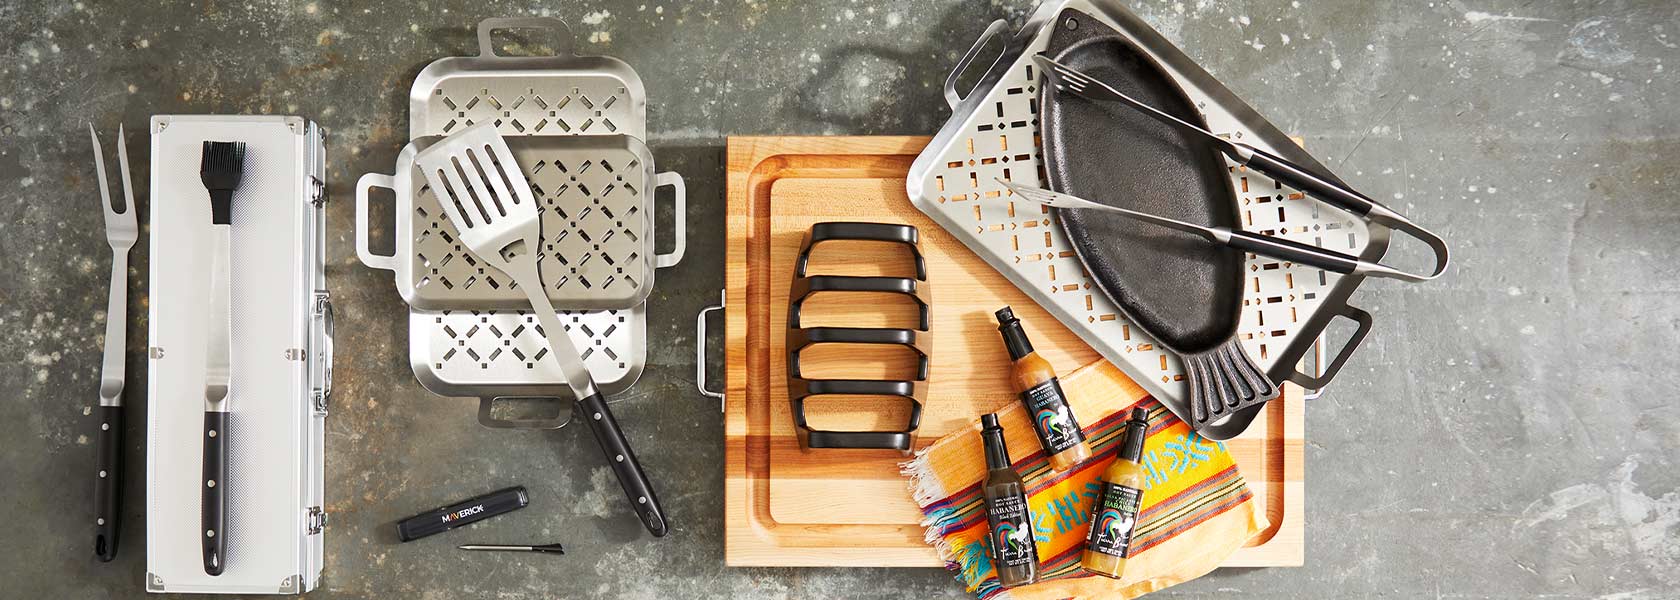 grilling grids, tools and cast iron fish pan